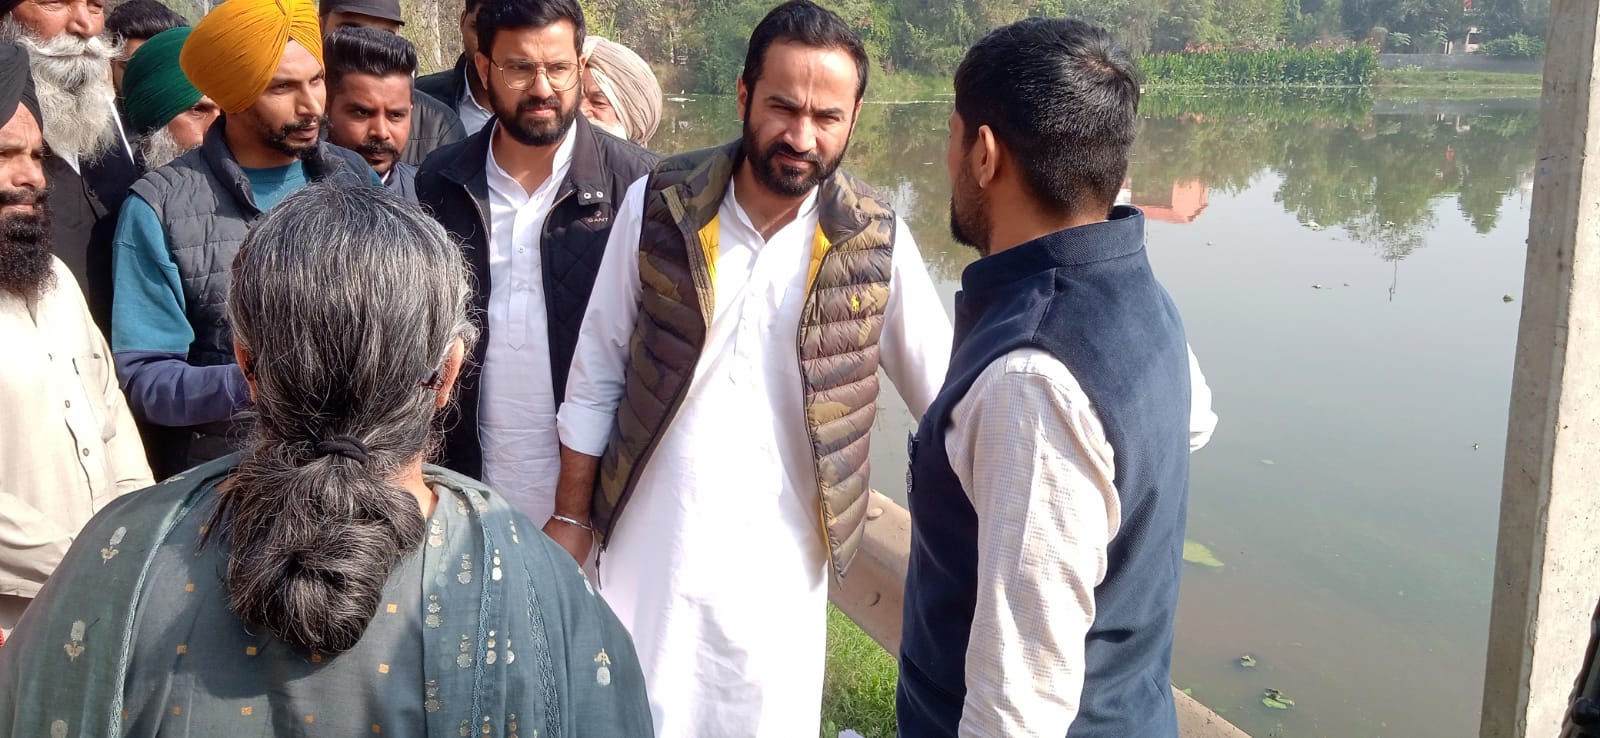 Minister Meet Hare visited the villages of Barnala